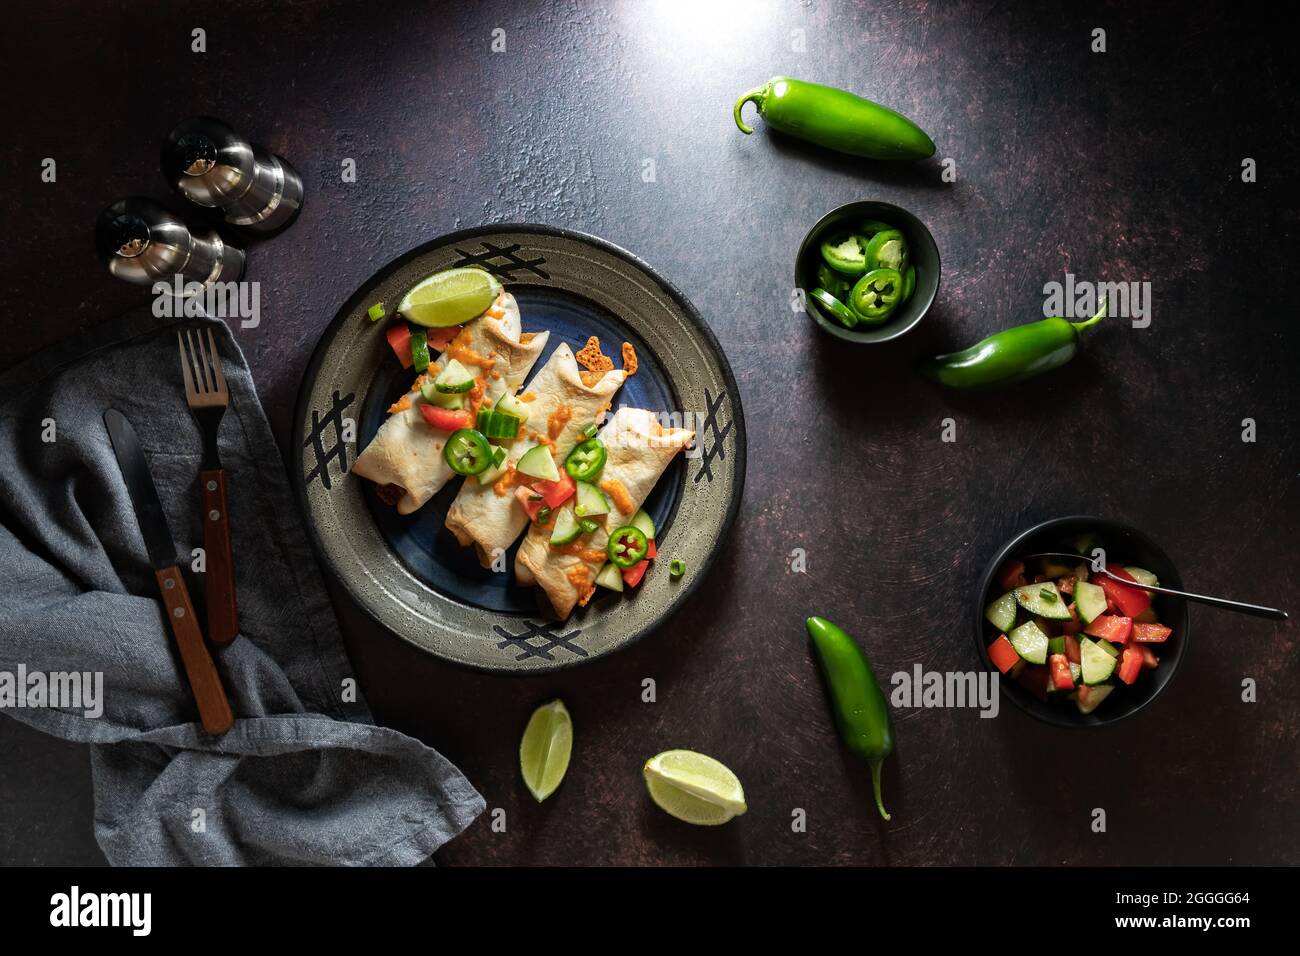 Top down view of a dish of taquitos surrounded by ingredients, against a dark background. Stock Photo